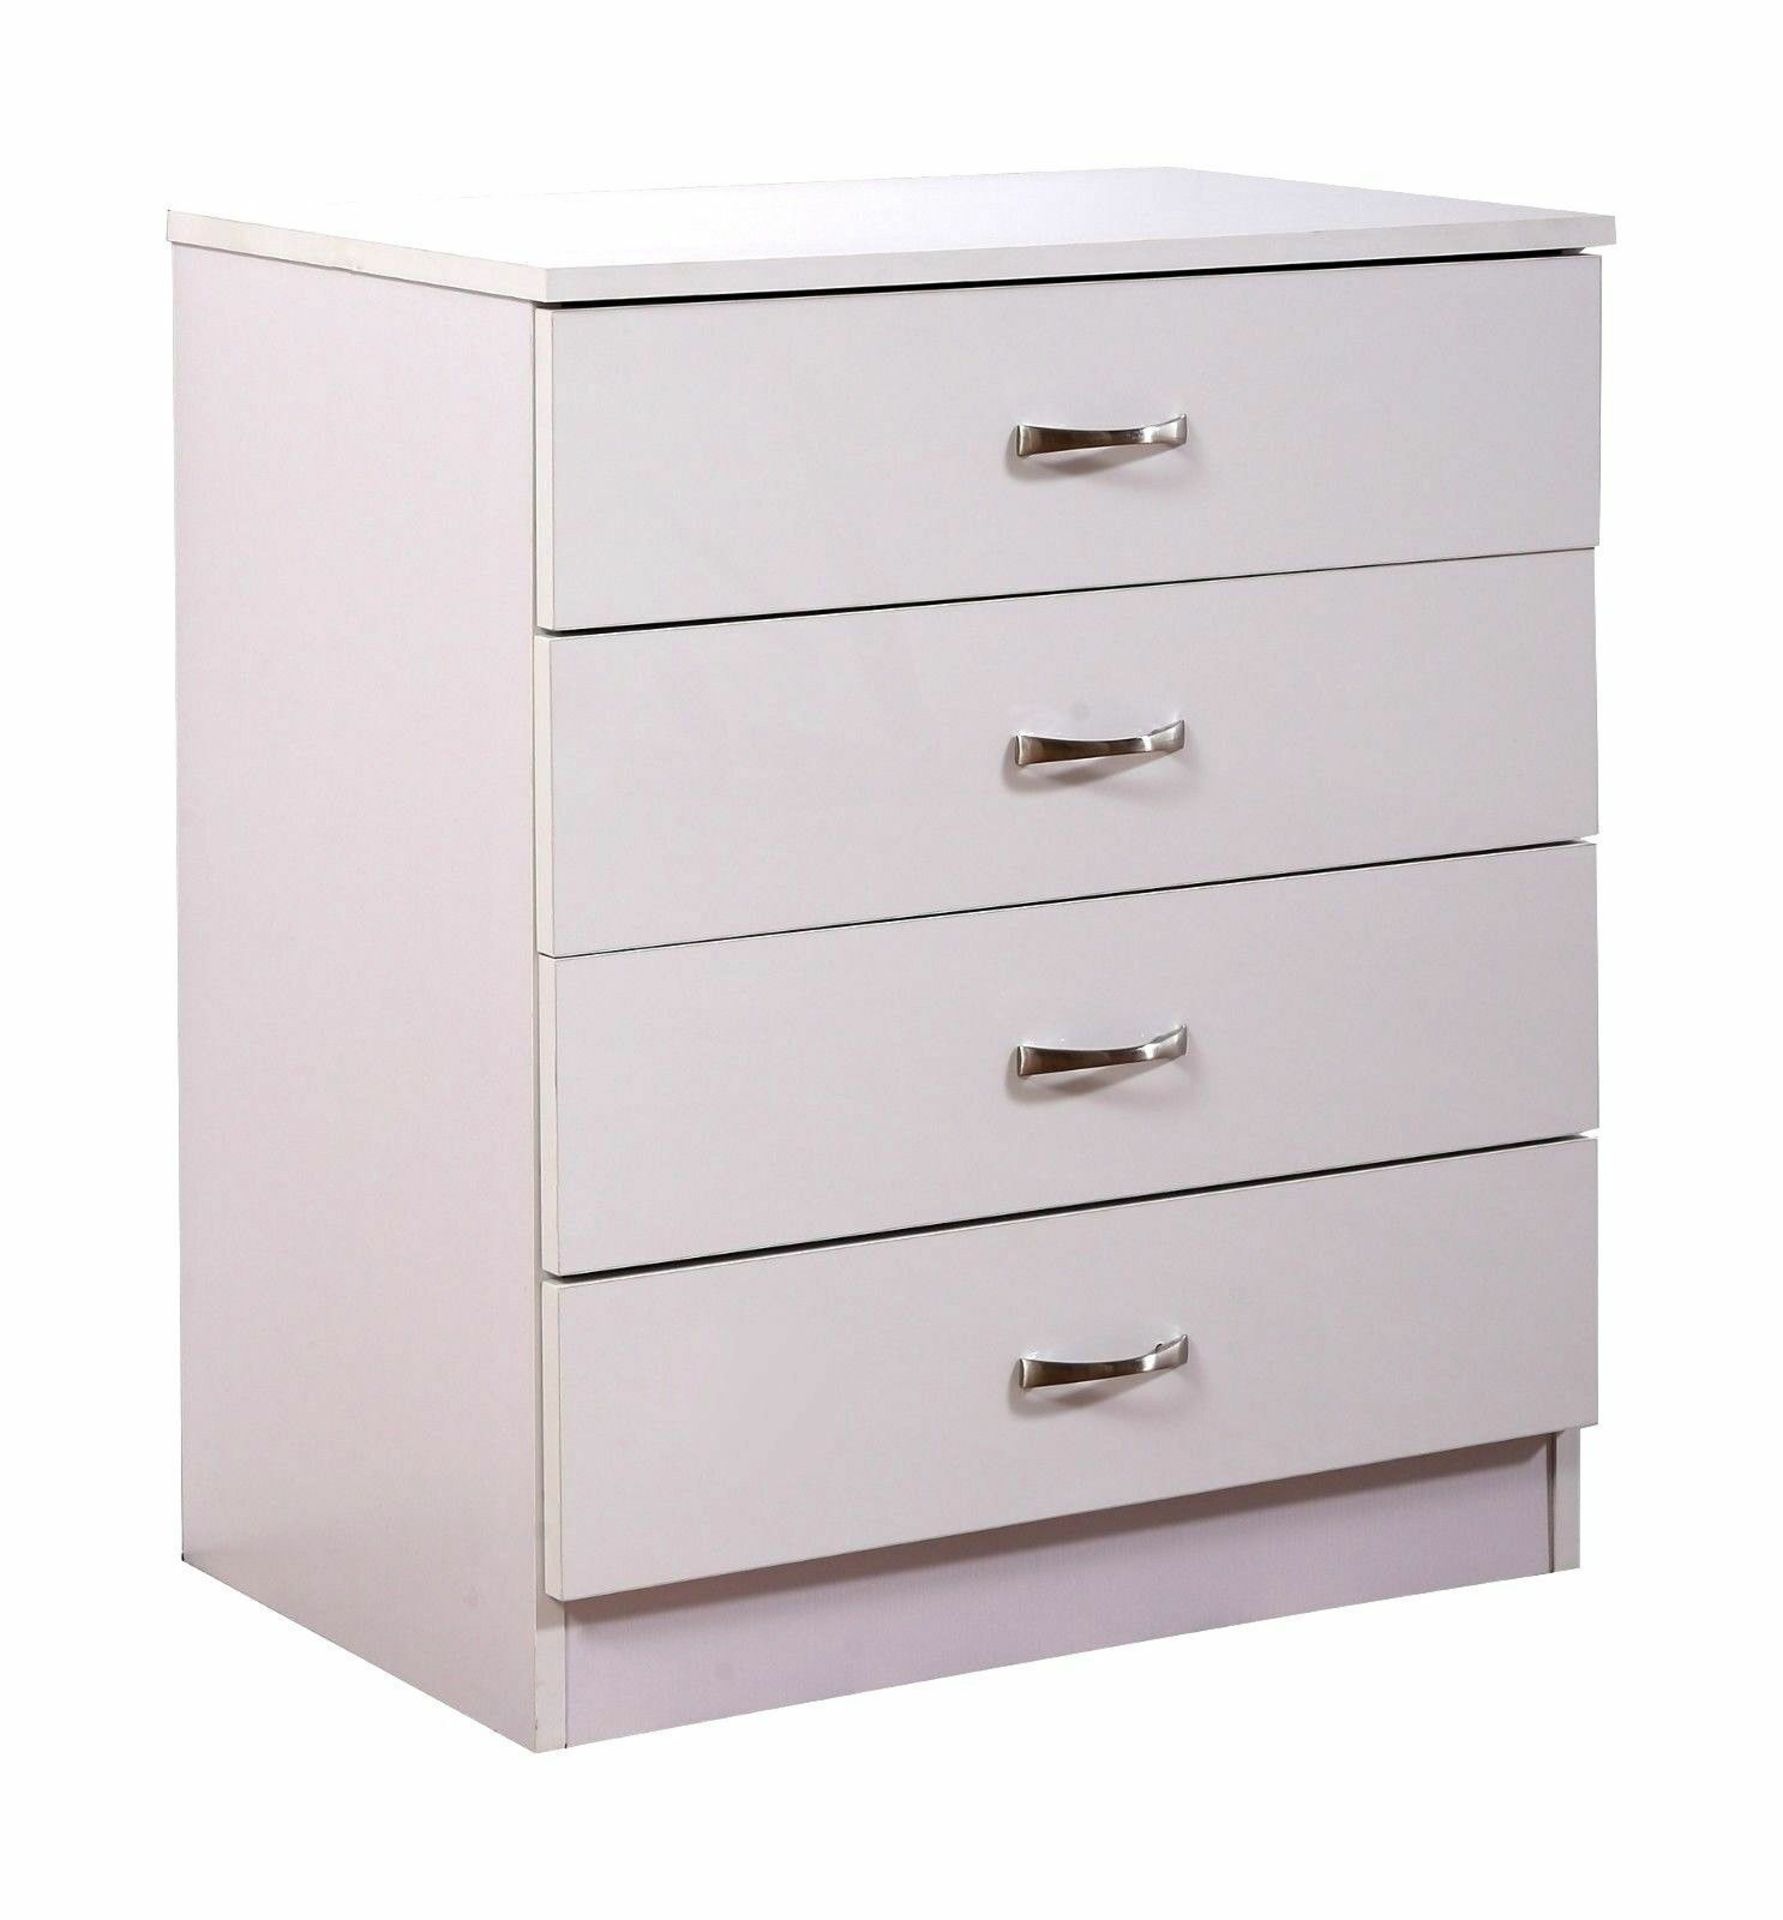 HIGH GLOSS WHITE 4 DRAWER CHEST - Image 3 of 4